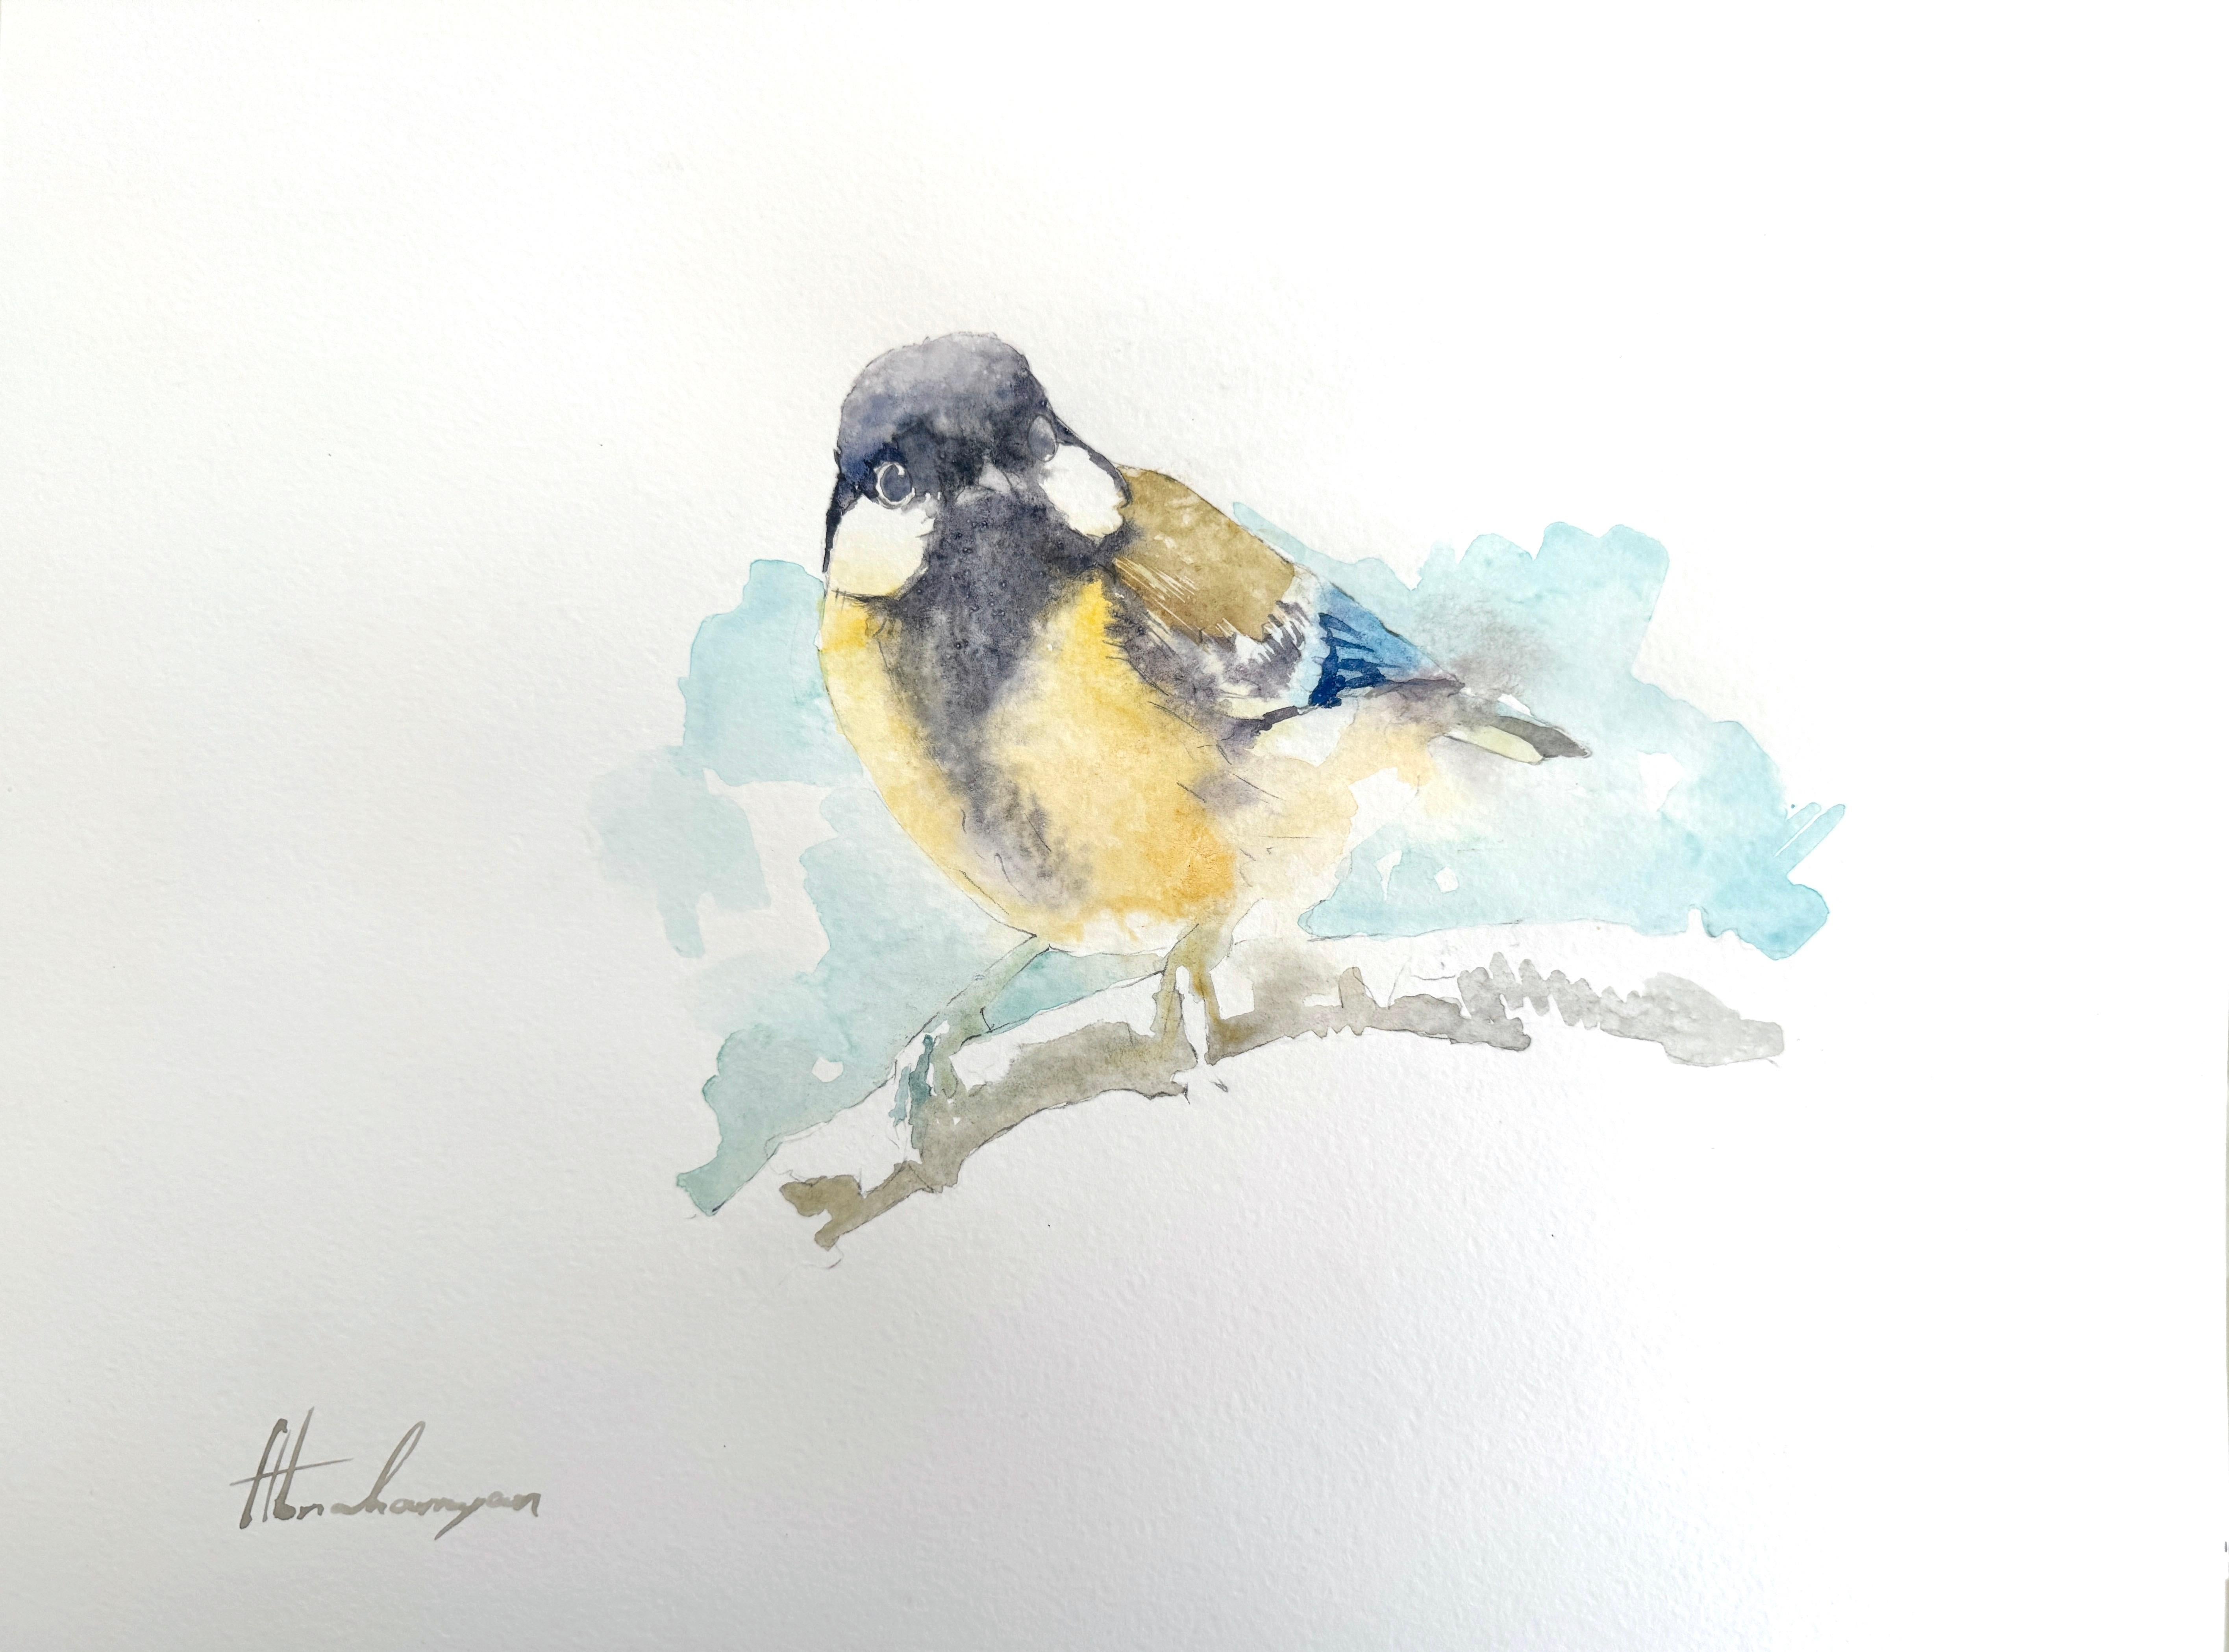 Artyom Abrahamyan Animal Art - Great Tit, Bird, Watercolor Handmade Painting, One of a Kind